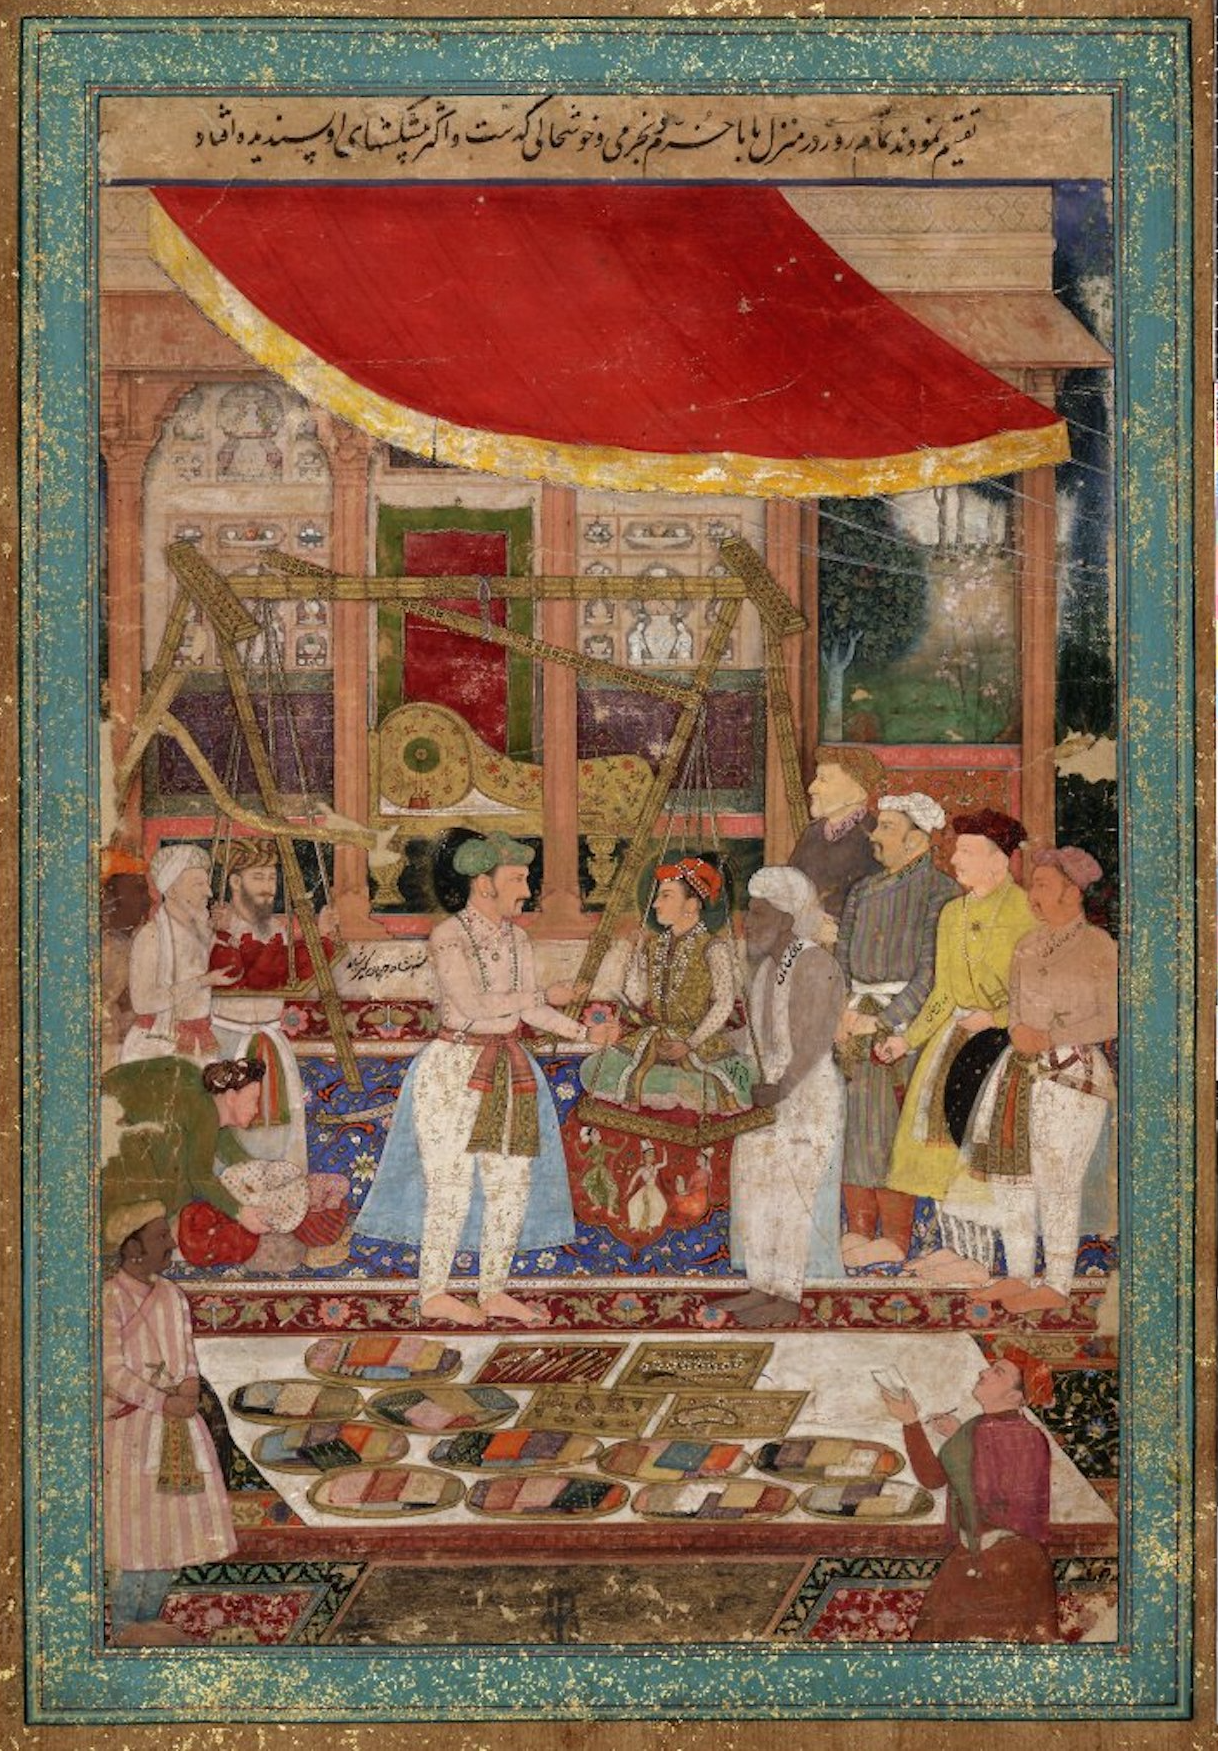 Emperor Jahangir Weighs Prince Khurram in Gold by  Manohar - 1610 - 1615 - 29.5 x 44.3 cm British Museum